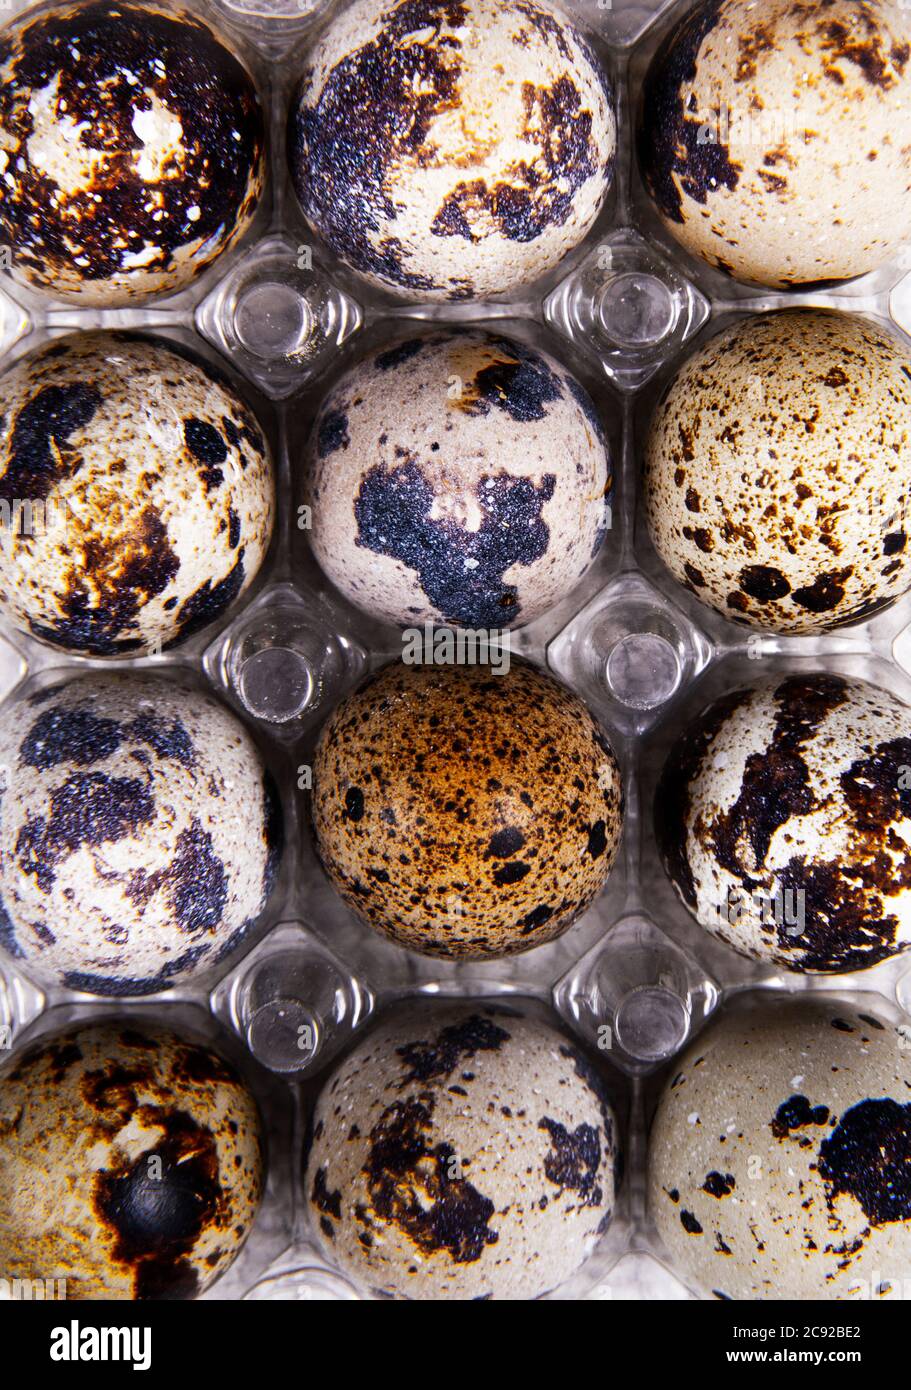 Healthy quail eggs are regularly or irregularly placed inside or outside the container. Stock Photo